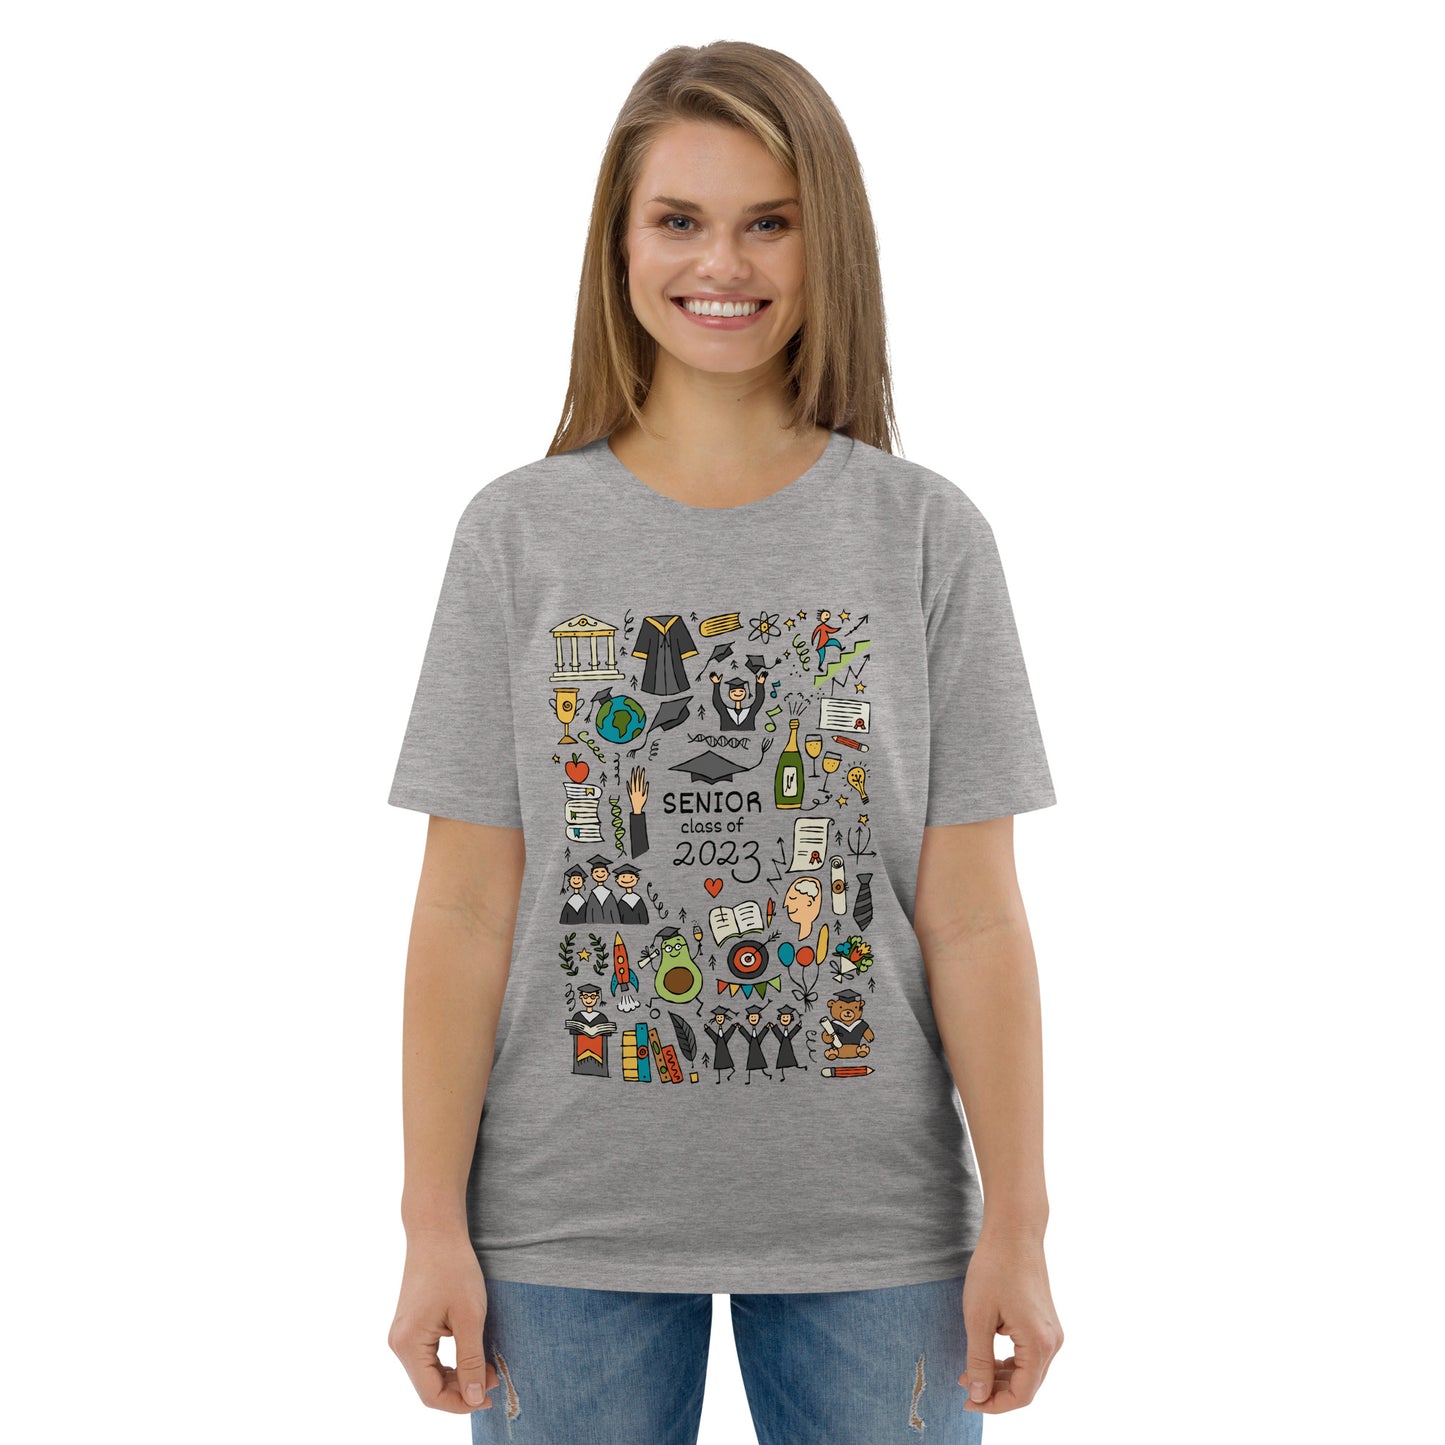 Girl in graduation grey t-shirt with funny designer print featuring graduates in hats and mantles, holiday-themed motifs, and a graduation teddy bear. Personalise it with your text